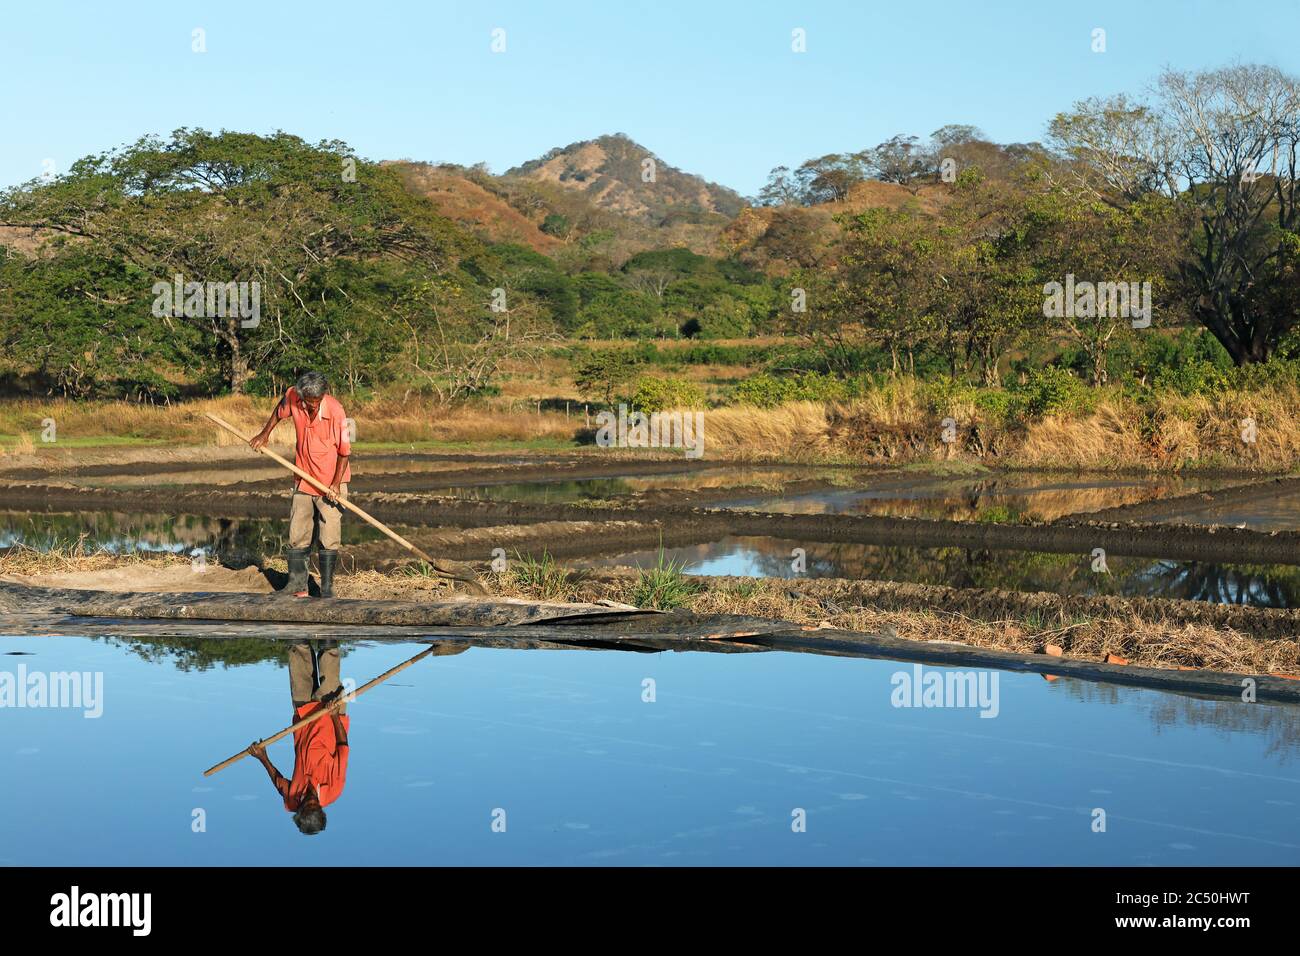 worker at a saline, Costa Rica Stock Photo